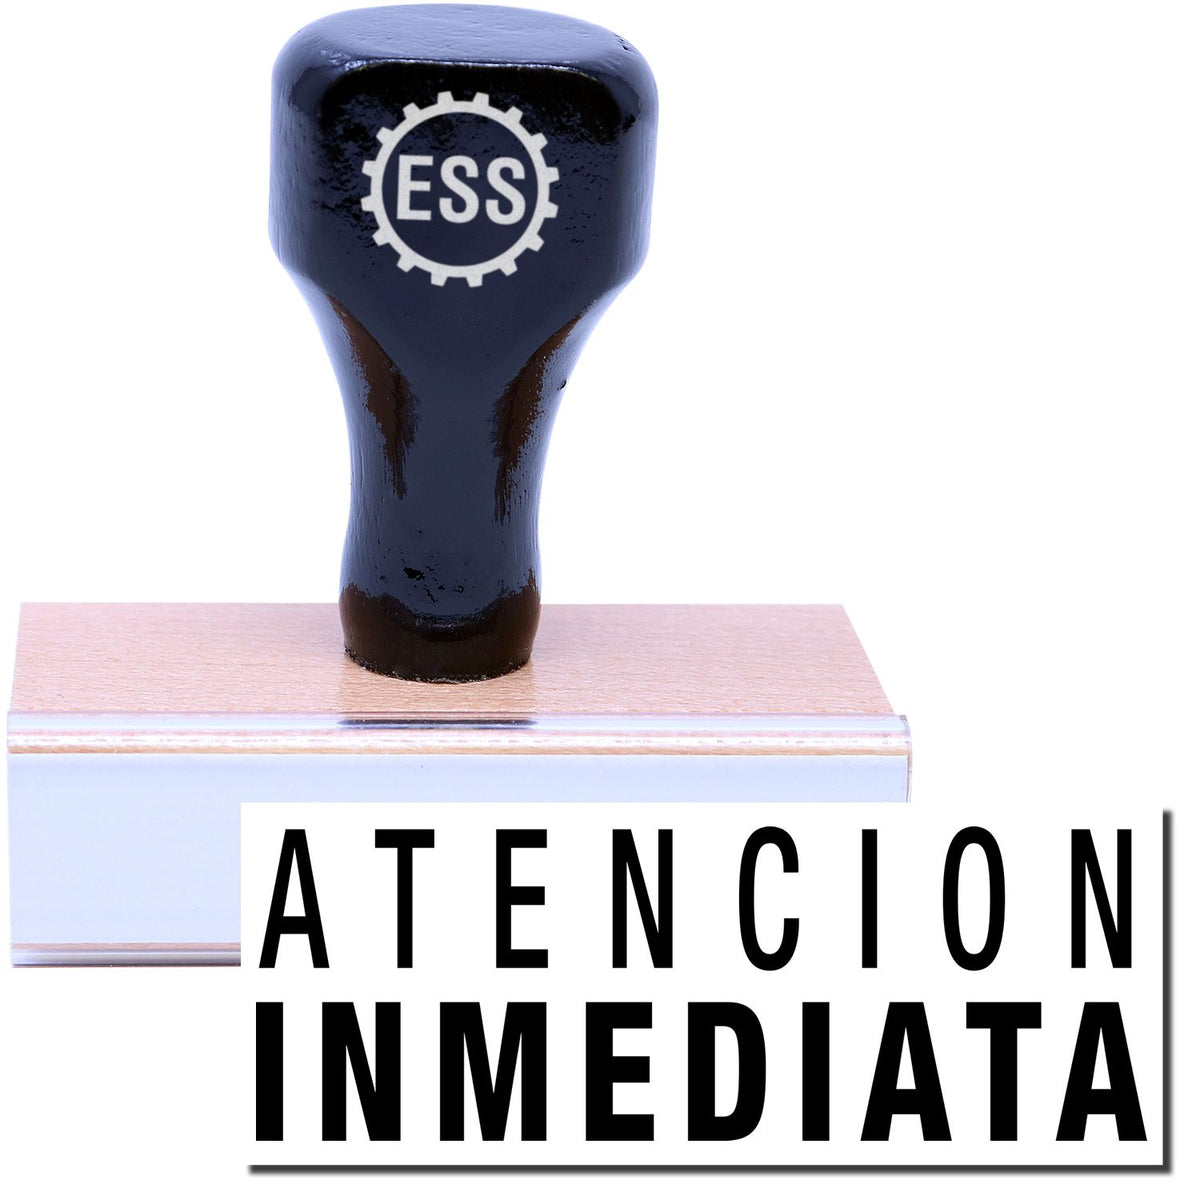 A stock office rubber stamp with a stamped image showing how the text &quot;ATENCION INMEDIATA&quot; is displayed after stamping.